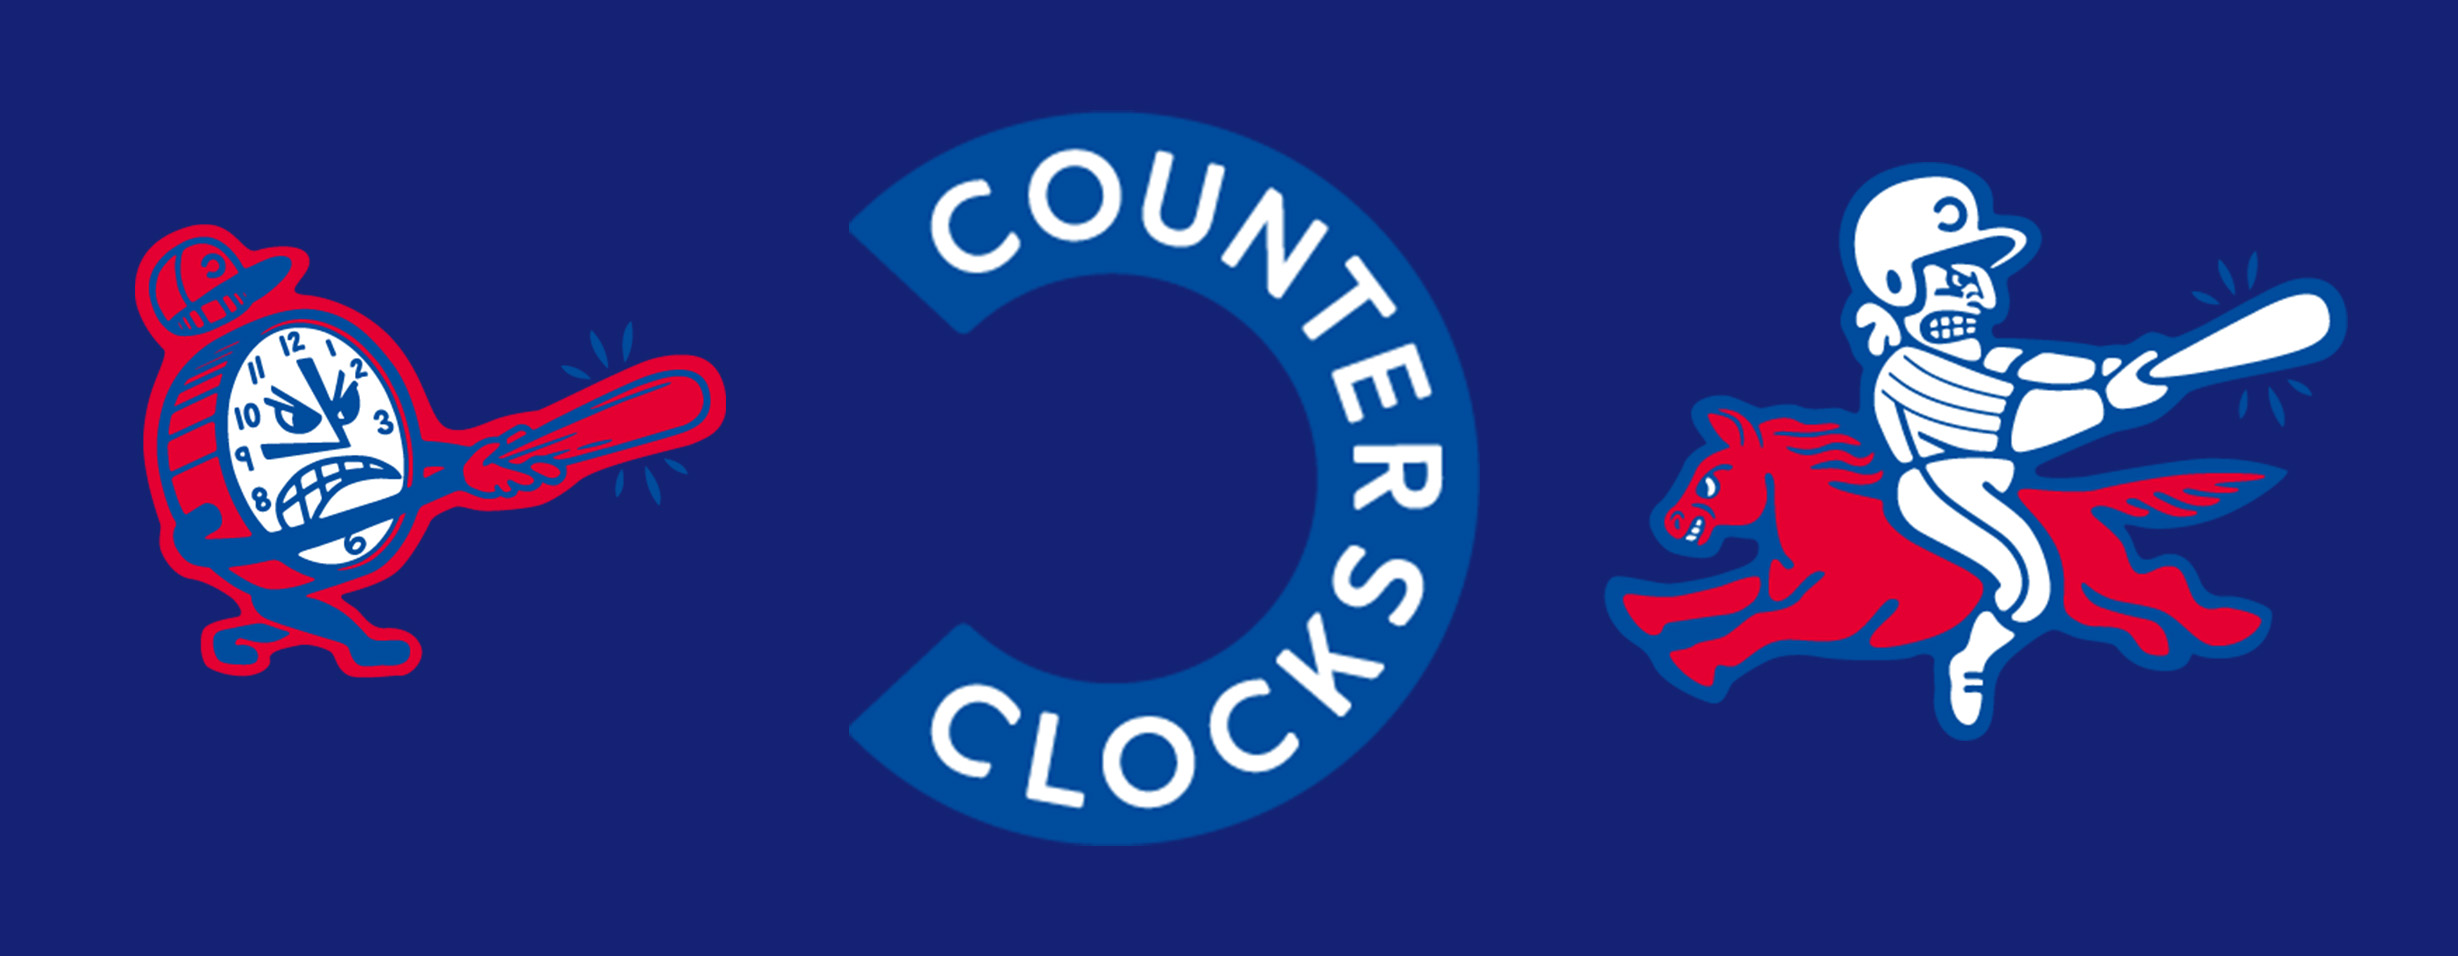 Lexington Counter Clocks ready for opening day